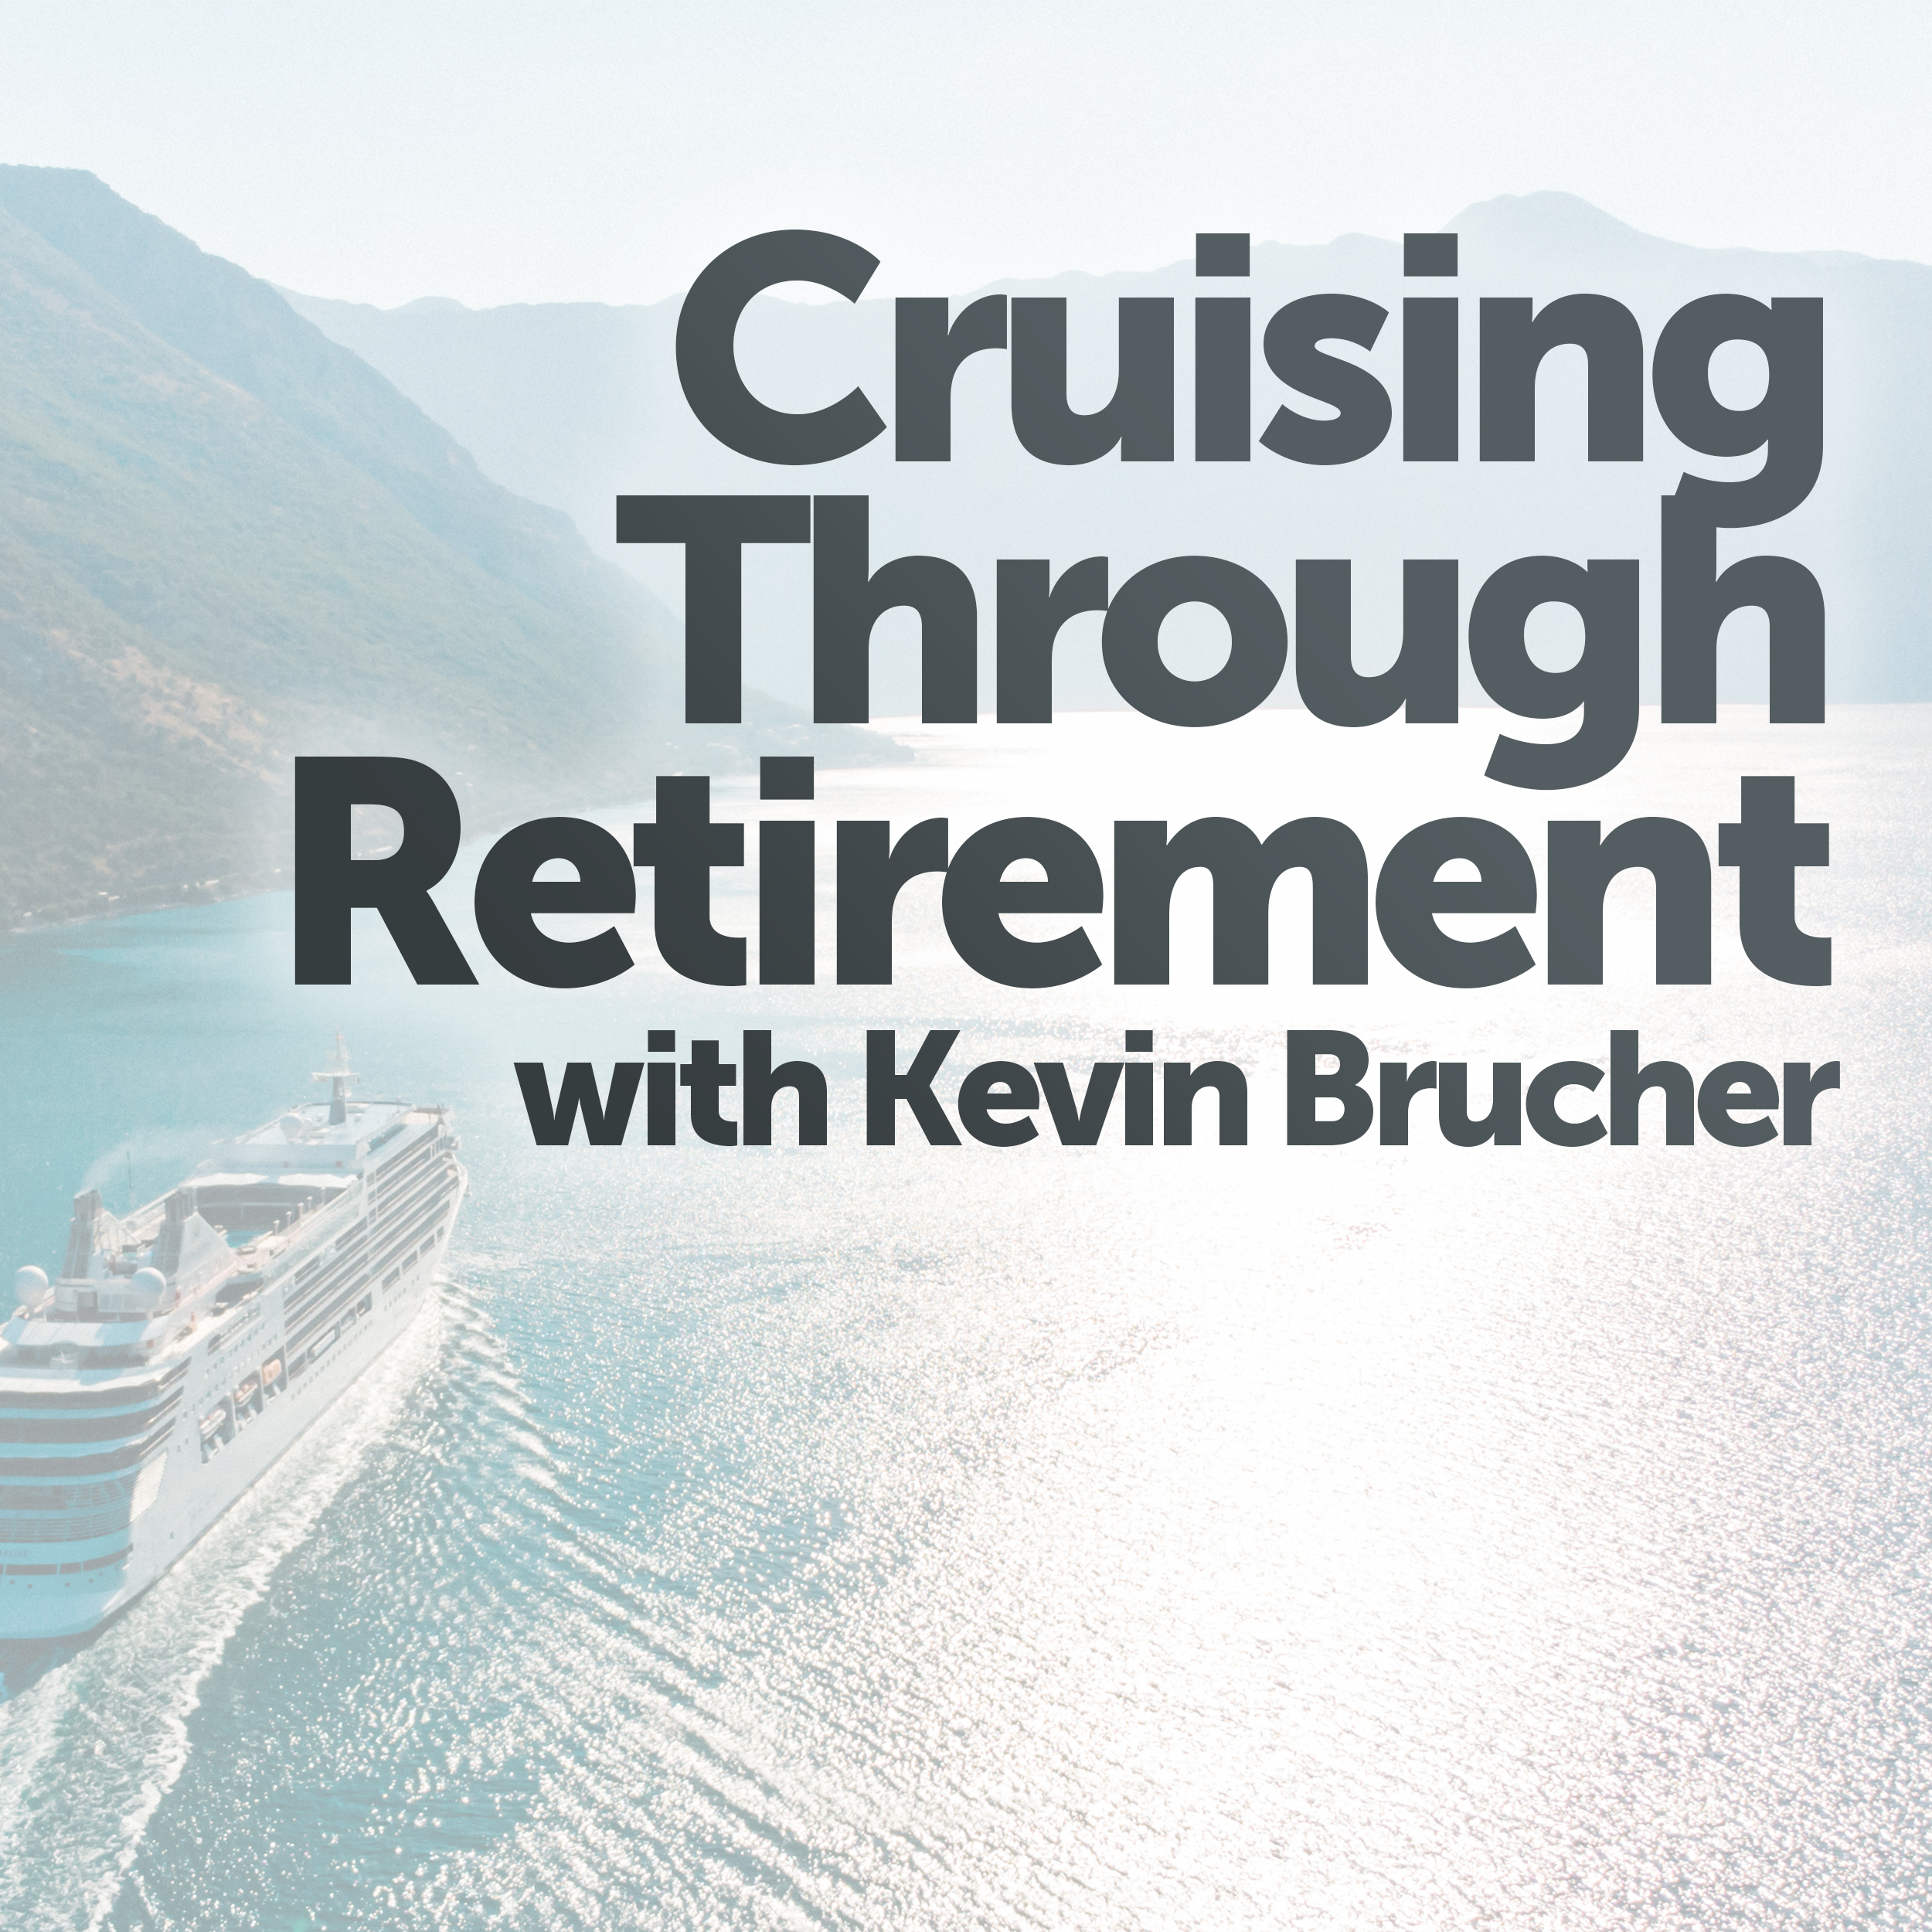 Ep 99 Cruising Through Retirement  Today Kevin Brucher has some tips to help you minimize risk, preserve your wealth and your sanity.